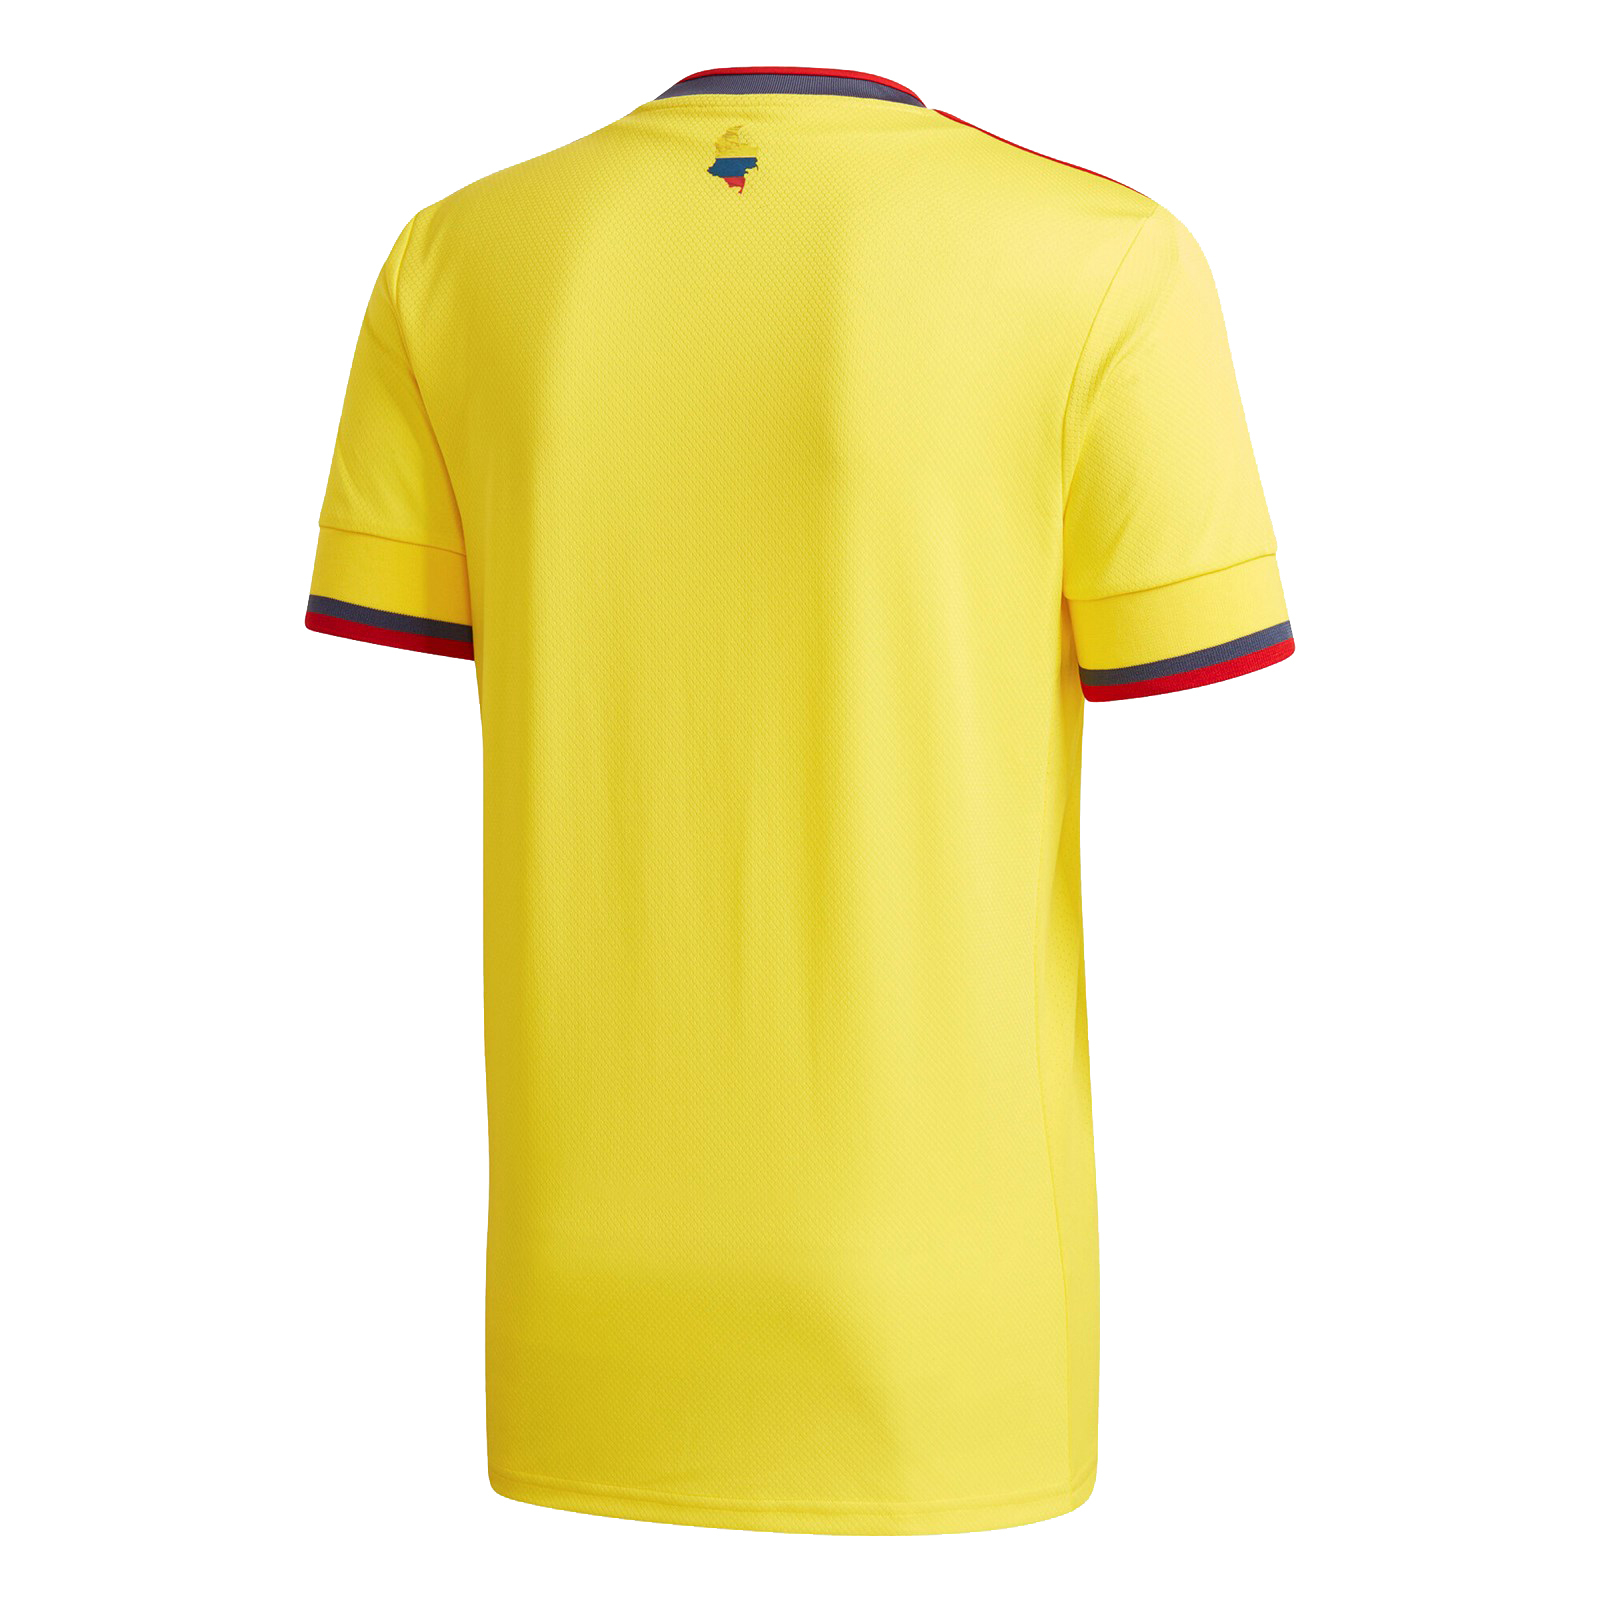 2021 Colombia Home Football Jersey Shirts Men's